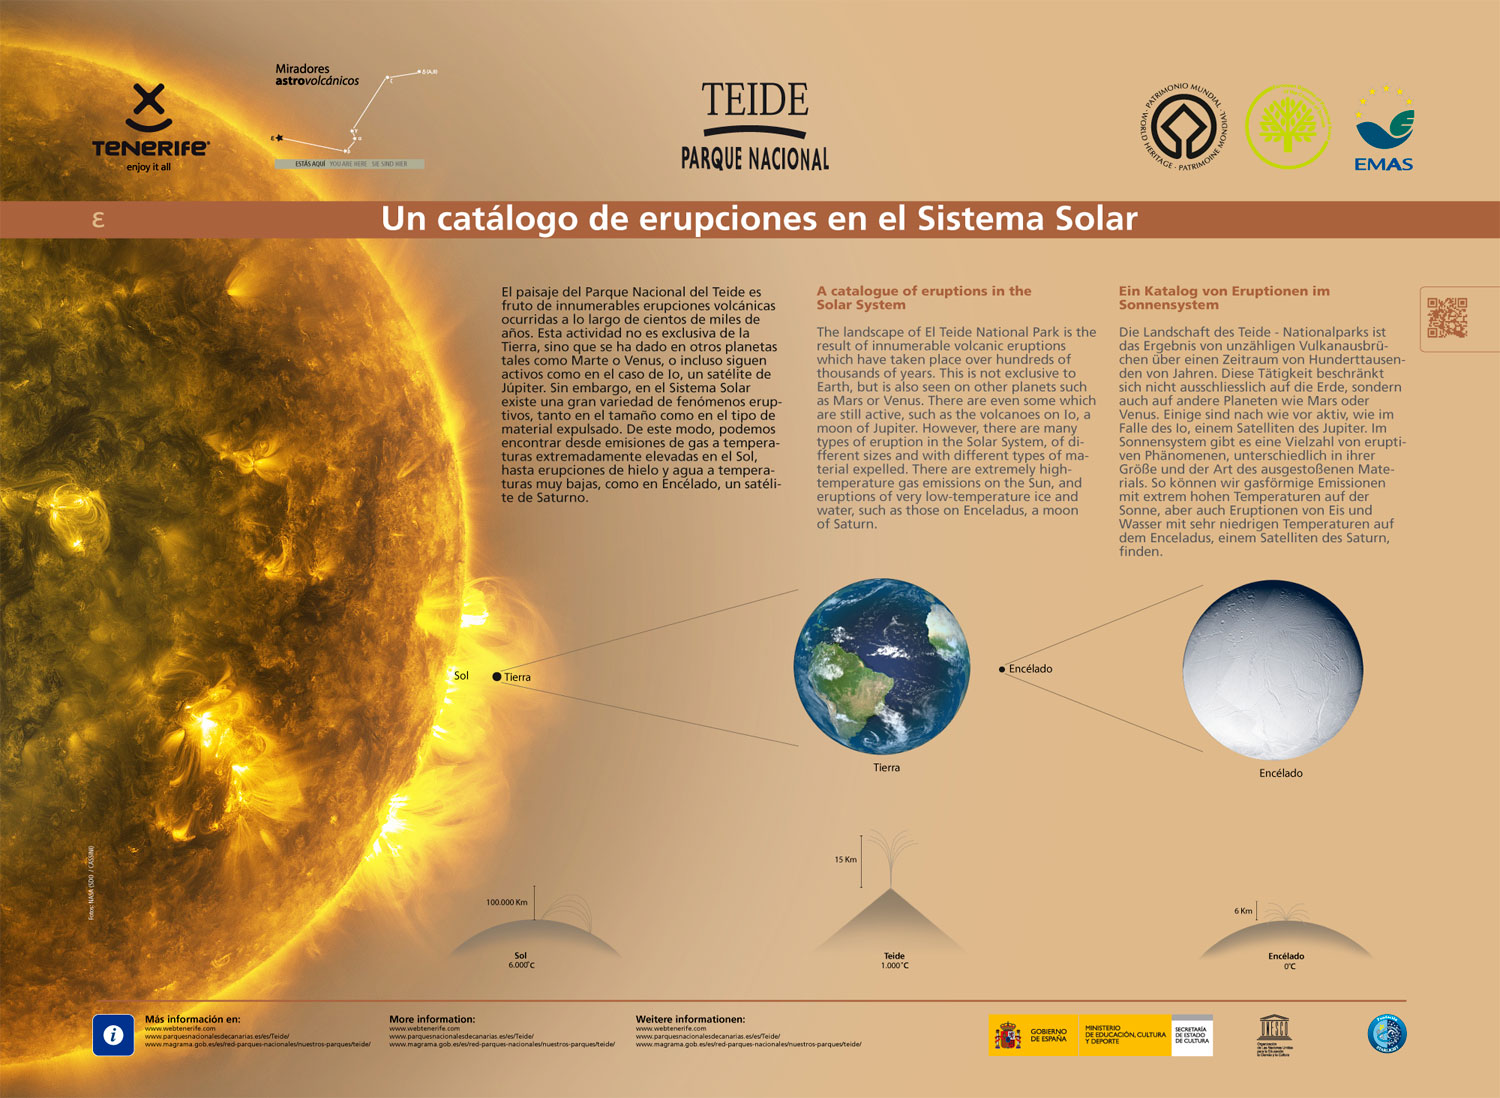 A catalogue of eruptions in the solar system